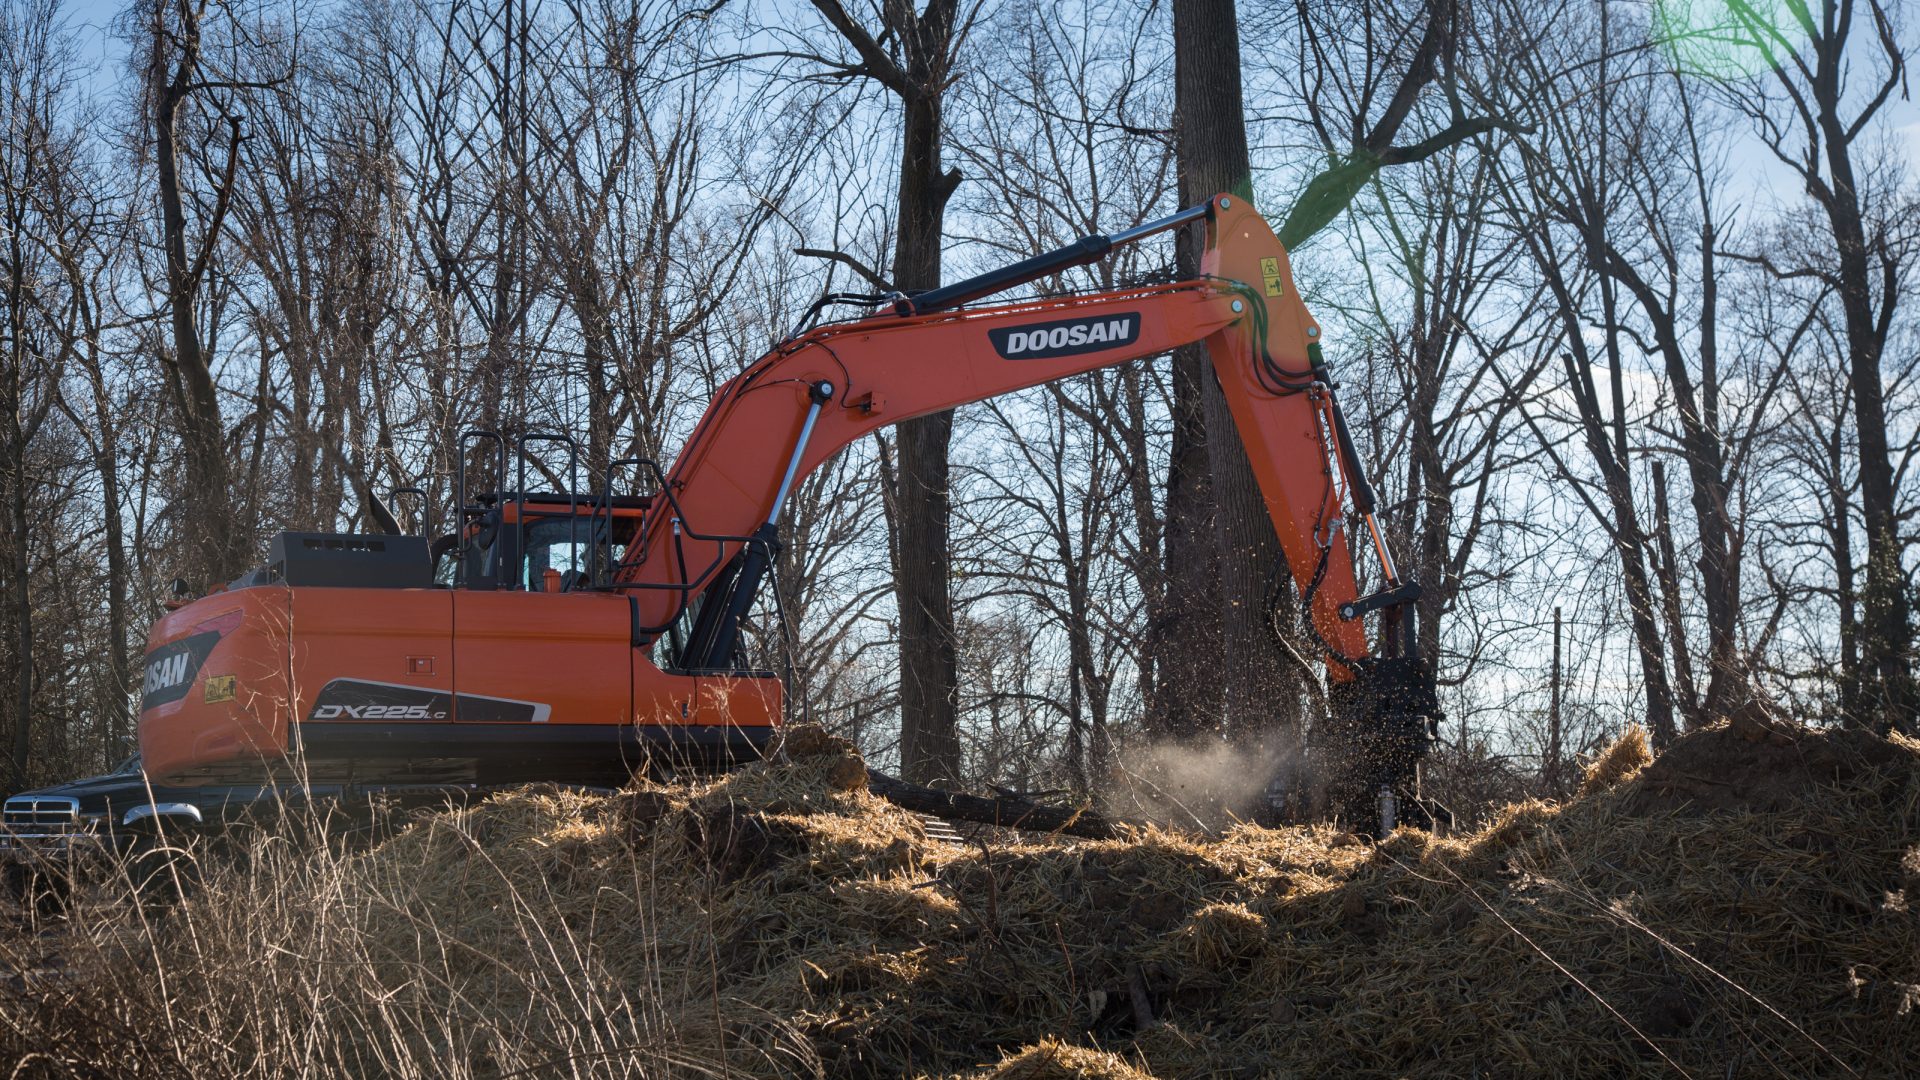 The Mariner East 2 pipeline has officially broken ground in the Delaware County town of Aston. The beginning stages of the pipeline includes clear cutting trees and preparing makeshift roads for the heavy machinery to traverse.